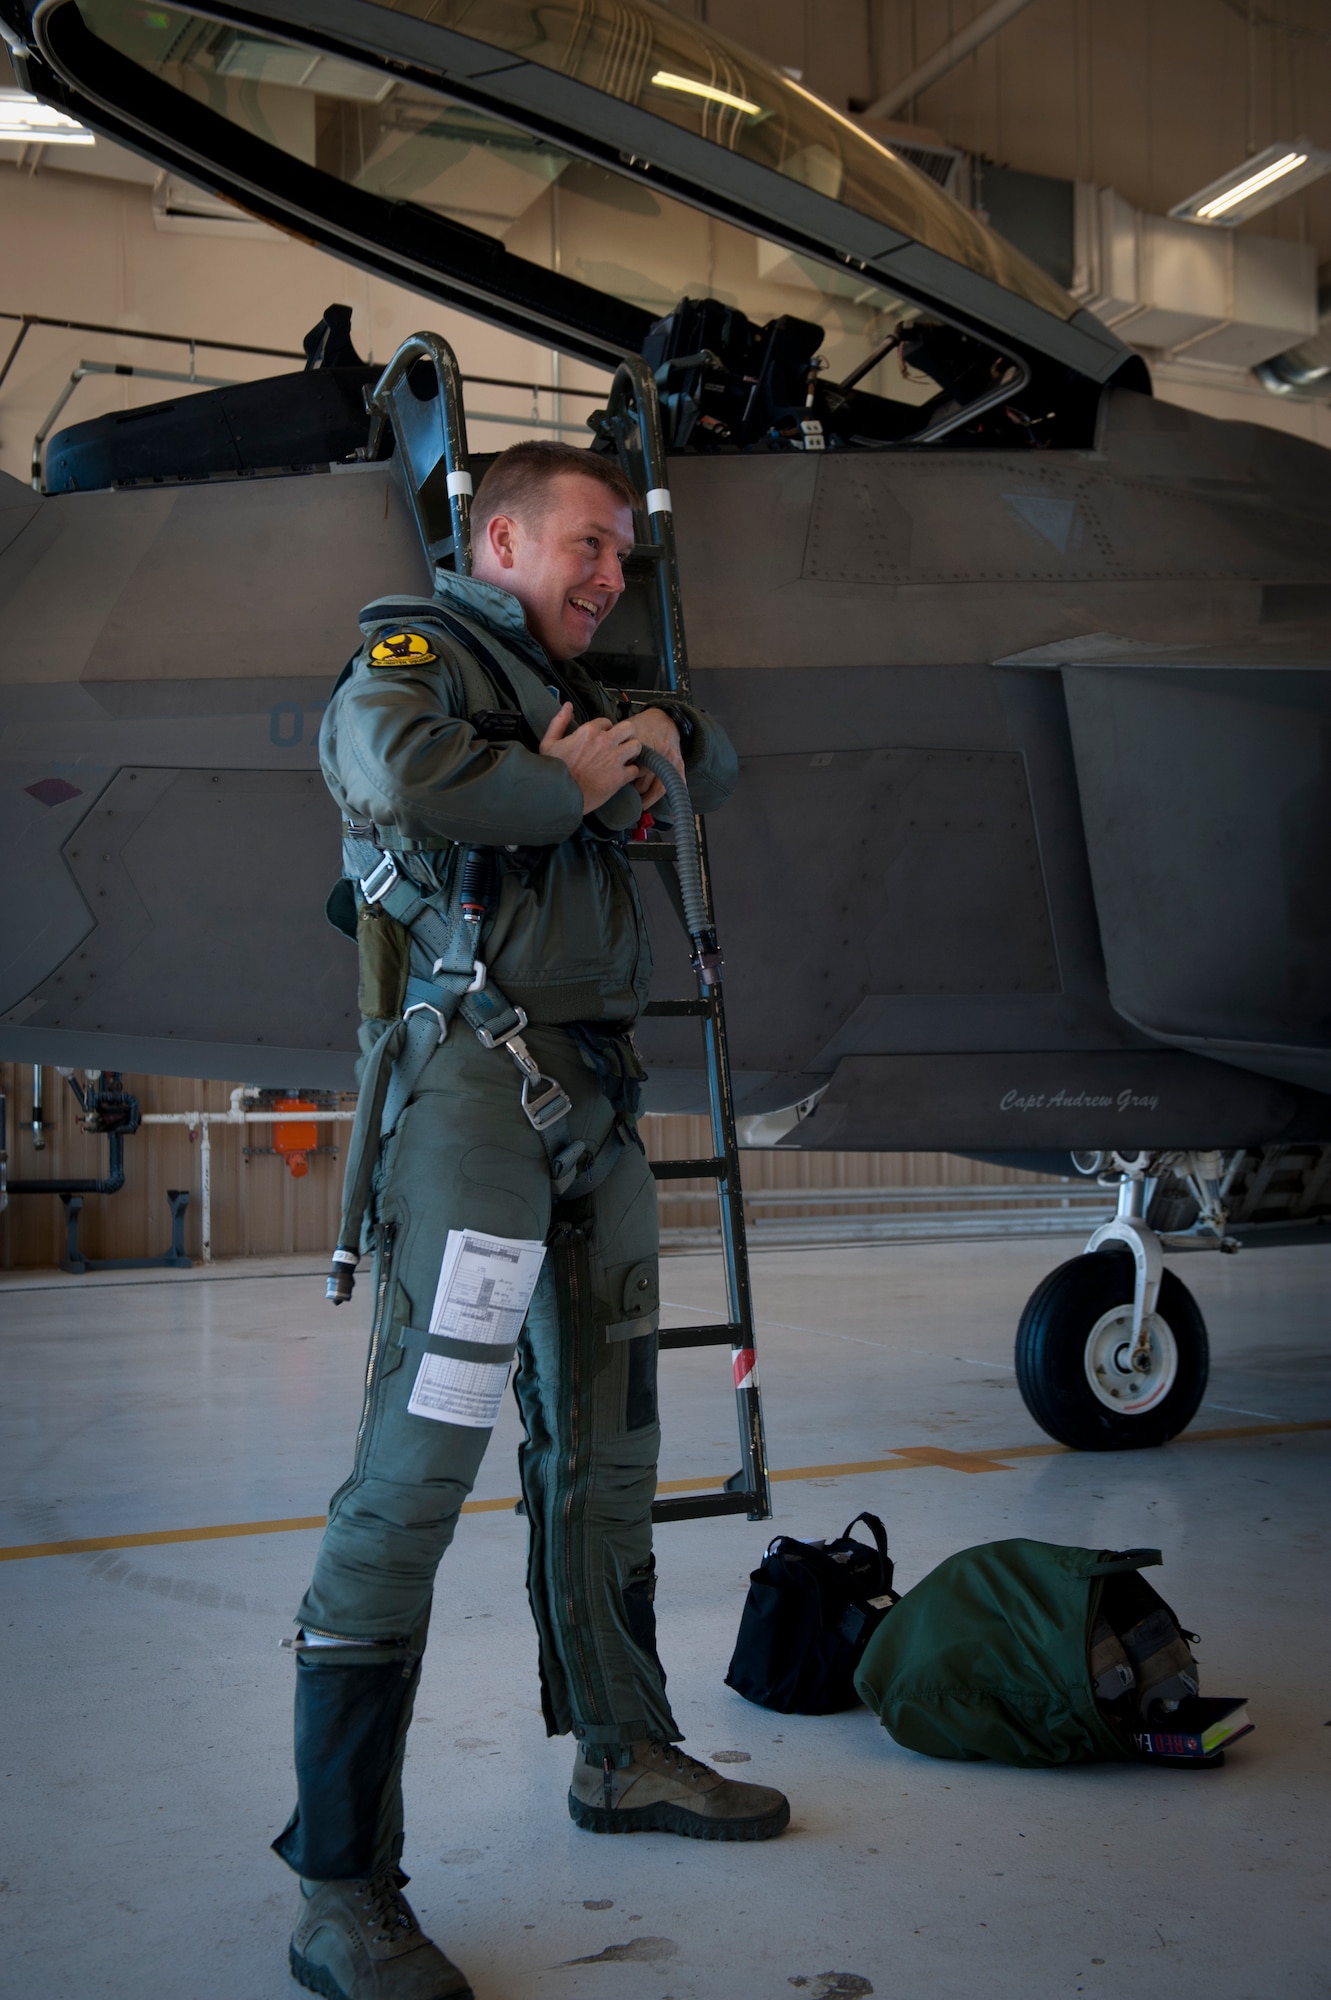 Lieutenant Colonel Shawn Anger, 7th Fighter Squadron commander, prepares to enter the cockpit of an F-22 Raptor at Holloman Air Force Base, N.M., Jan. 6. The first five of 24 combat-deployable F-22 Raptors left Holloman heading to Tyndall Air Force Base, Fla. as a permanent change of station. The five F-22s that left Jan. 6 will be followed by six Raptors leaving each month until the move is completed. (U.S. Air Force photo by Airman 1st Class Aaron Montoya)